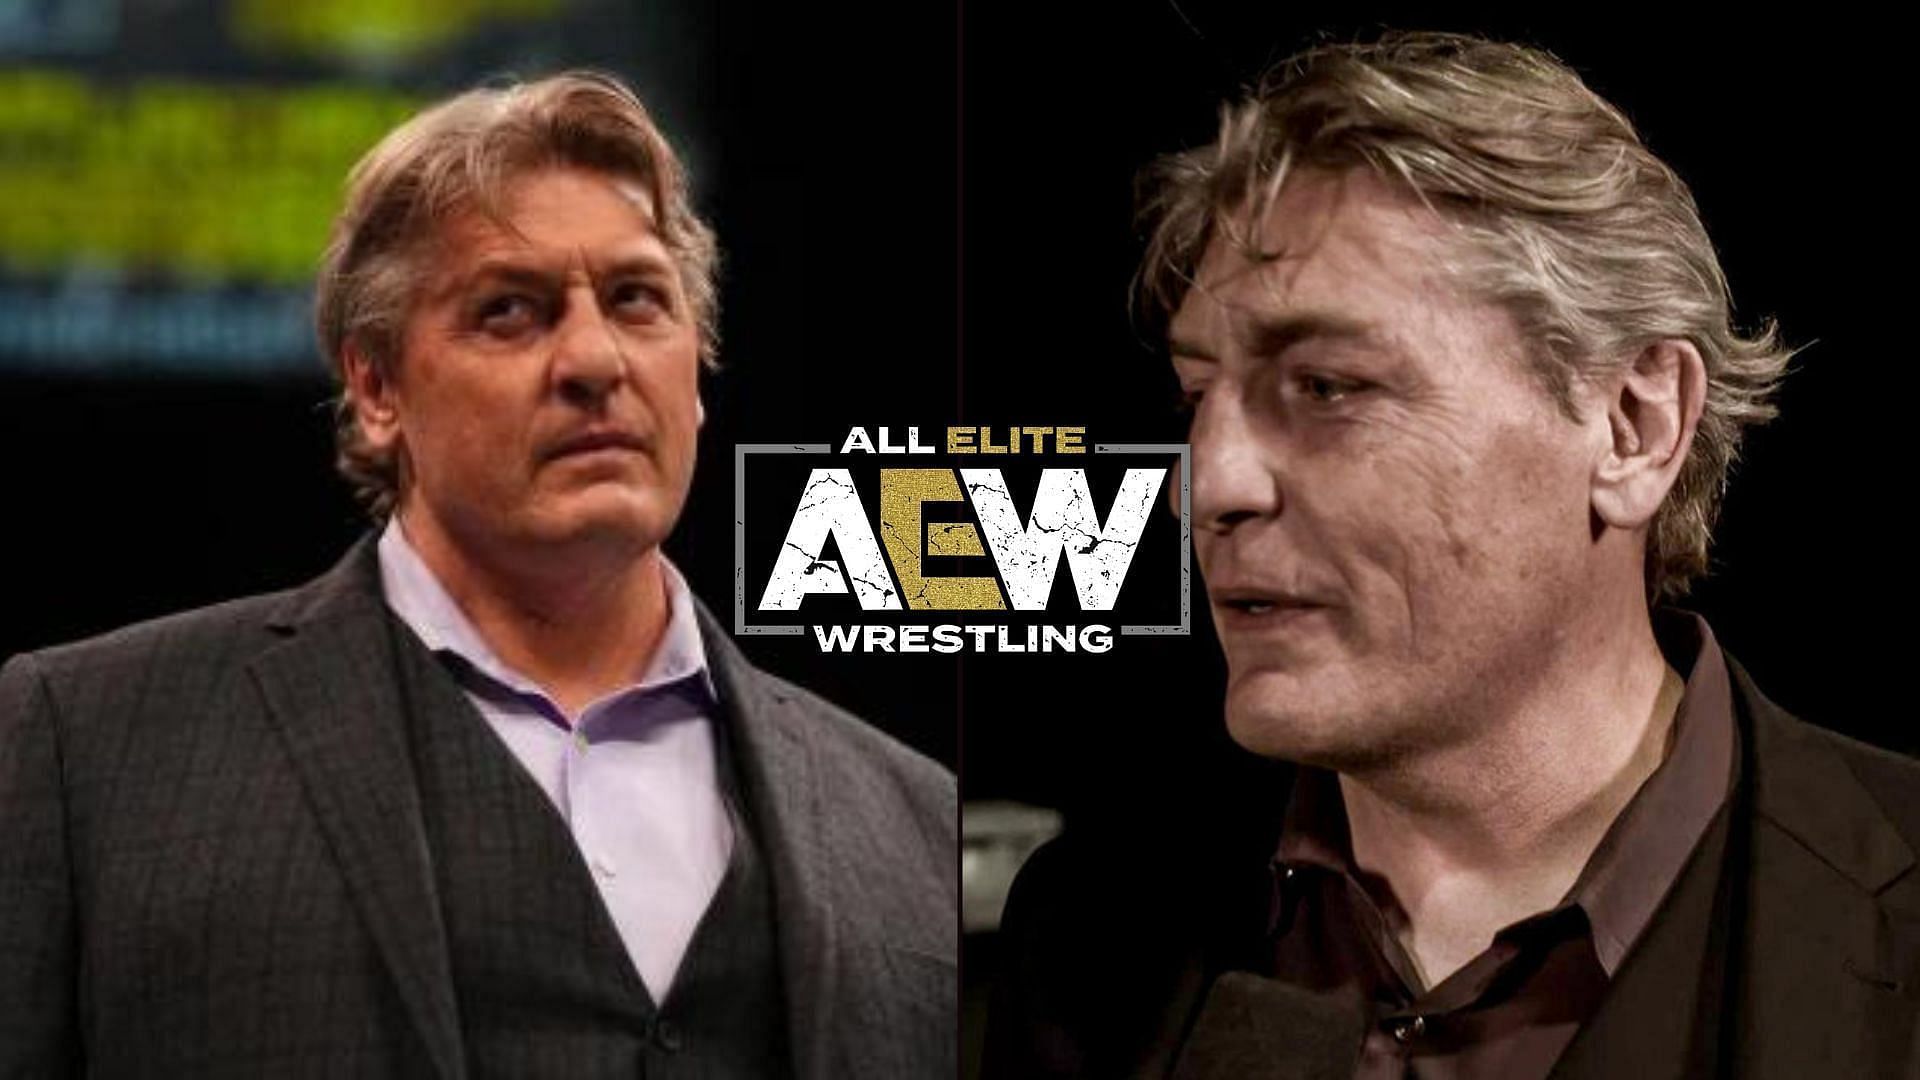 William Regal was contacted by WWE during his time in AEW.